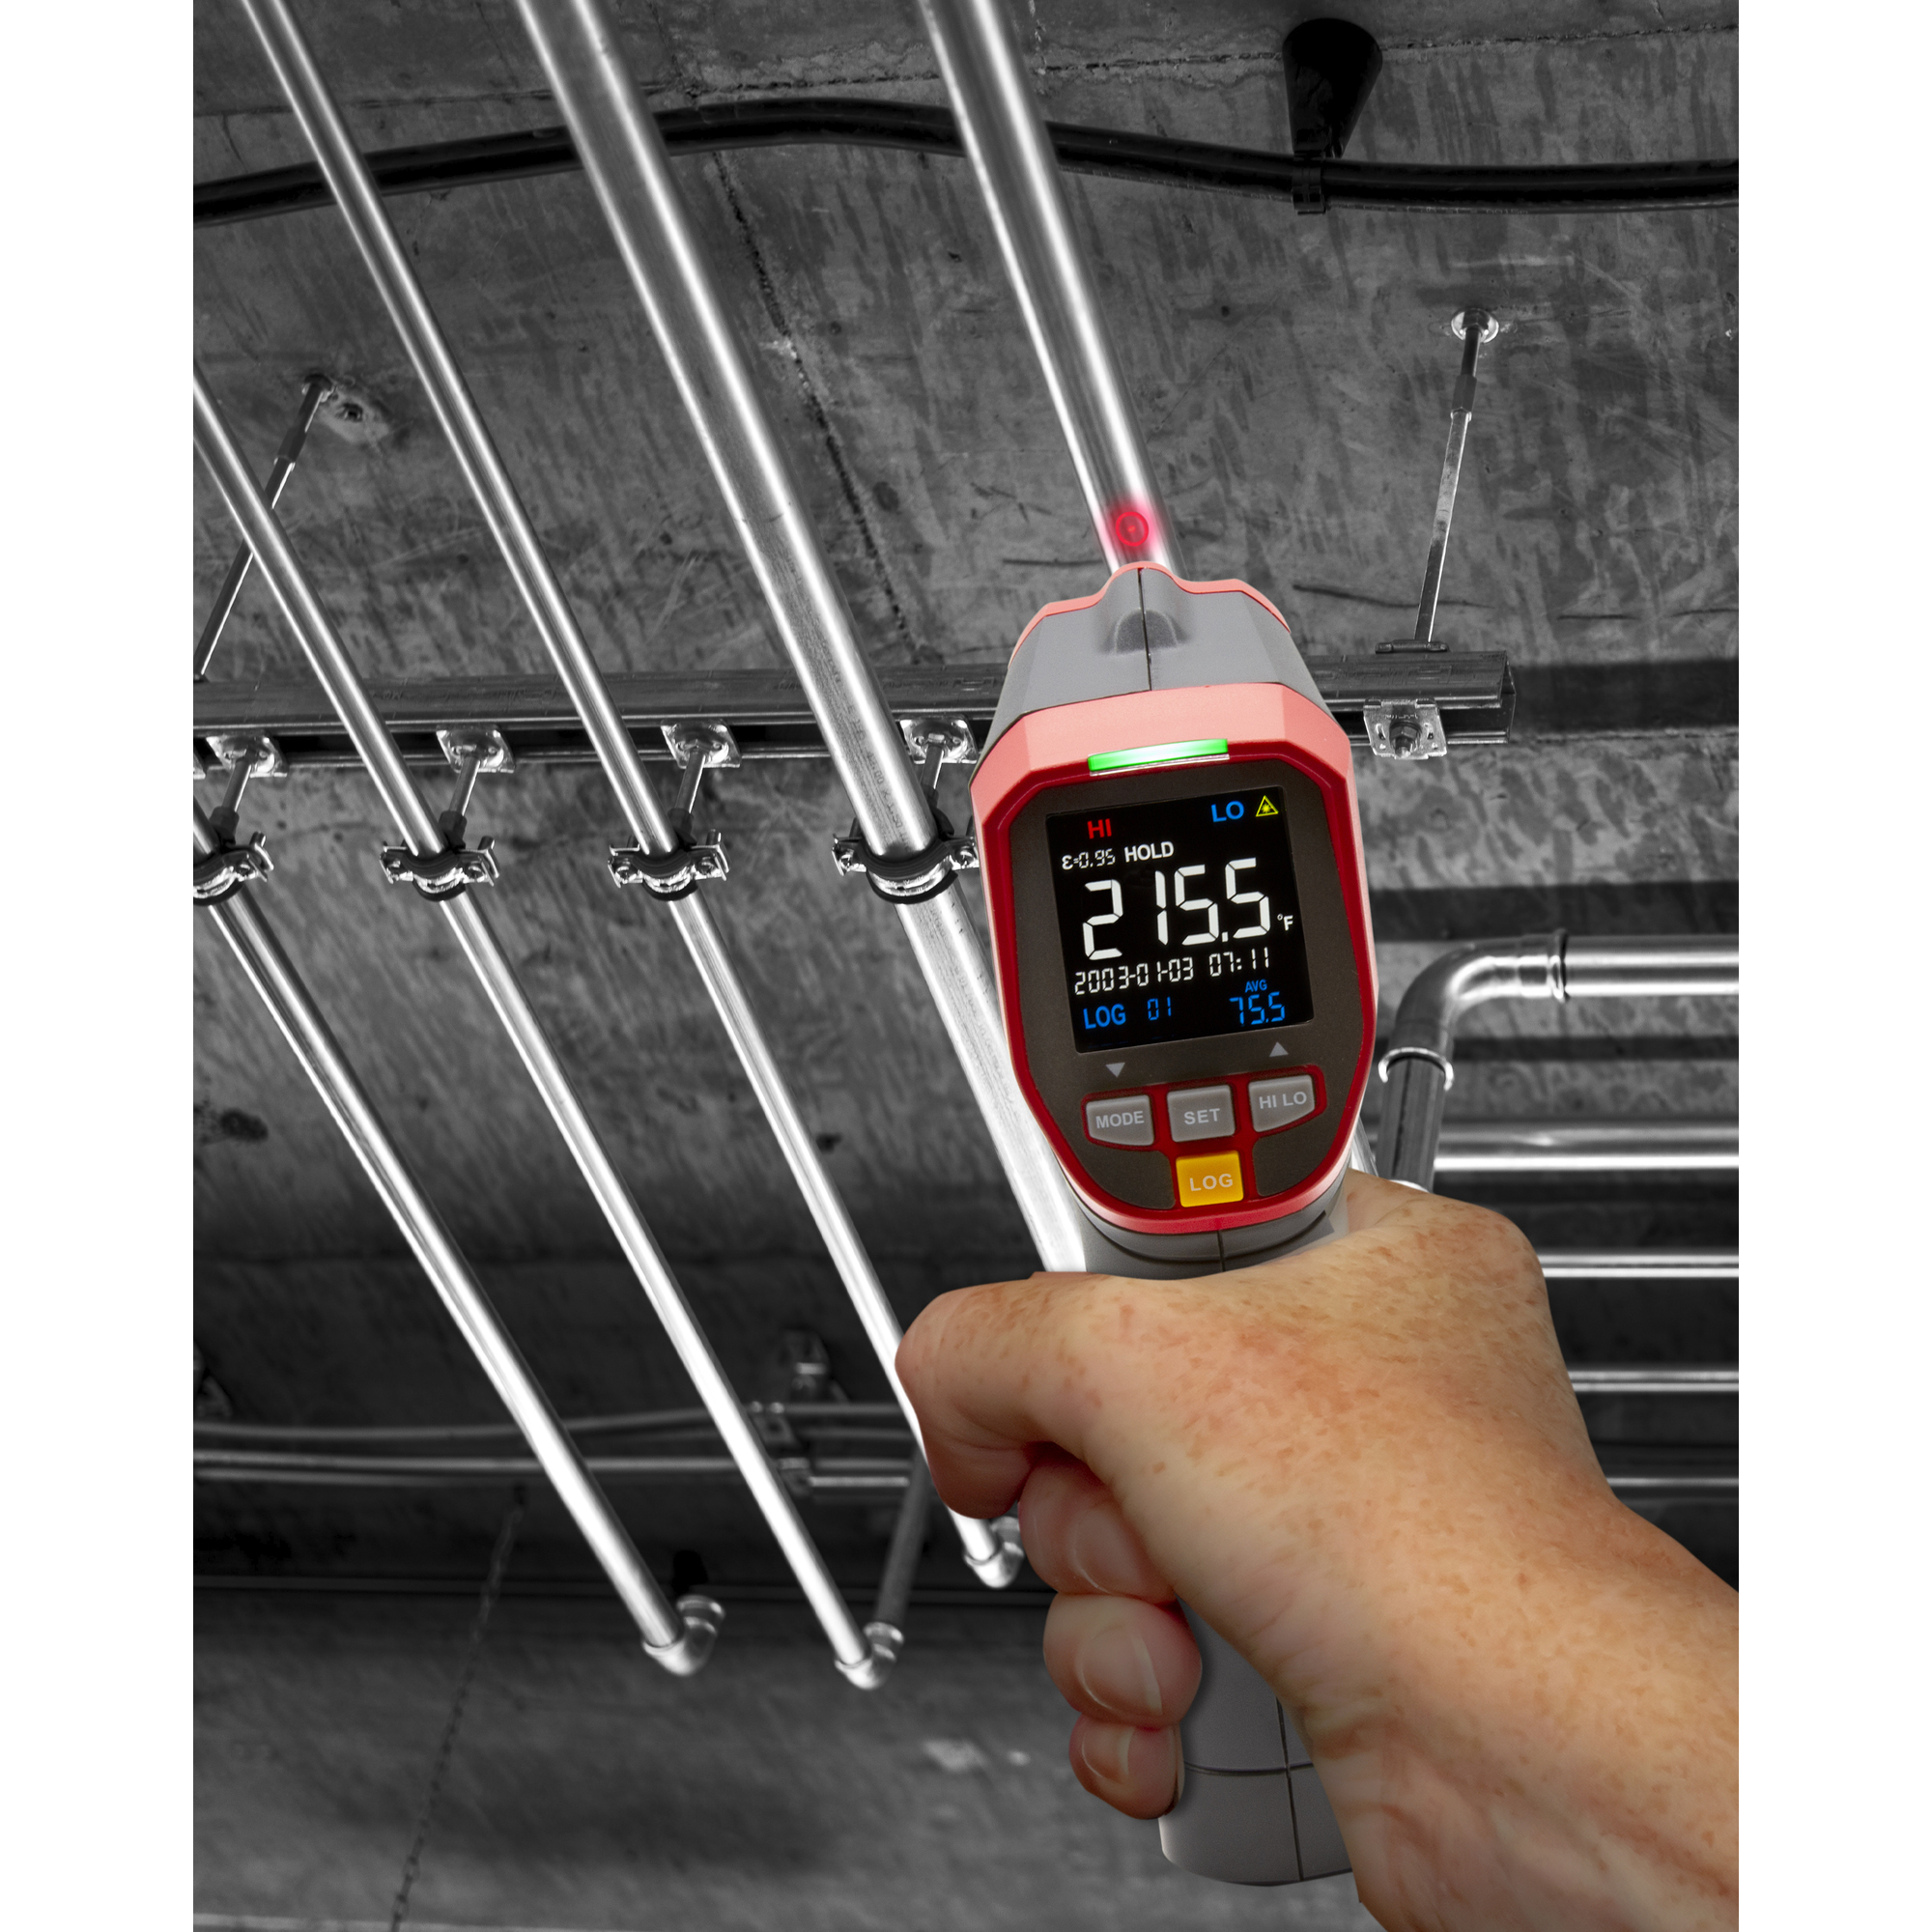 Triplett IRT350 12:1 Infrared Thermometer with Circular Laser